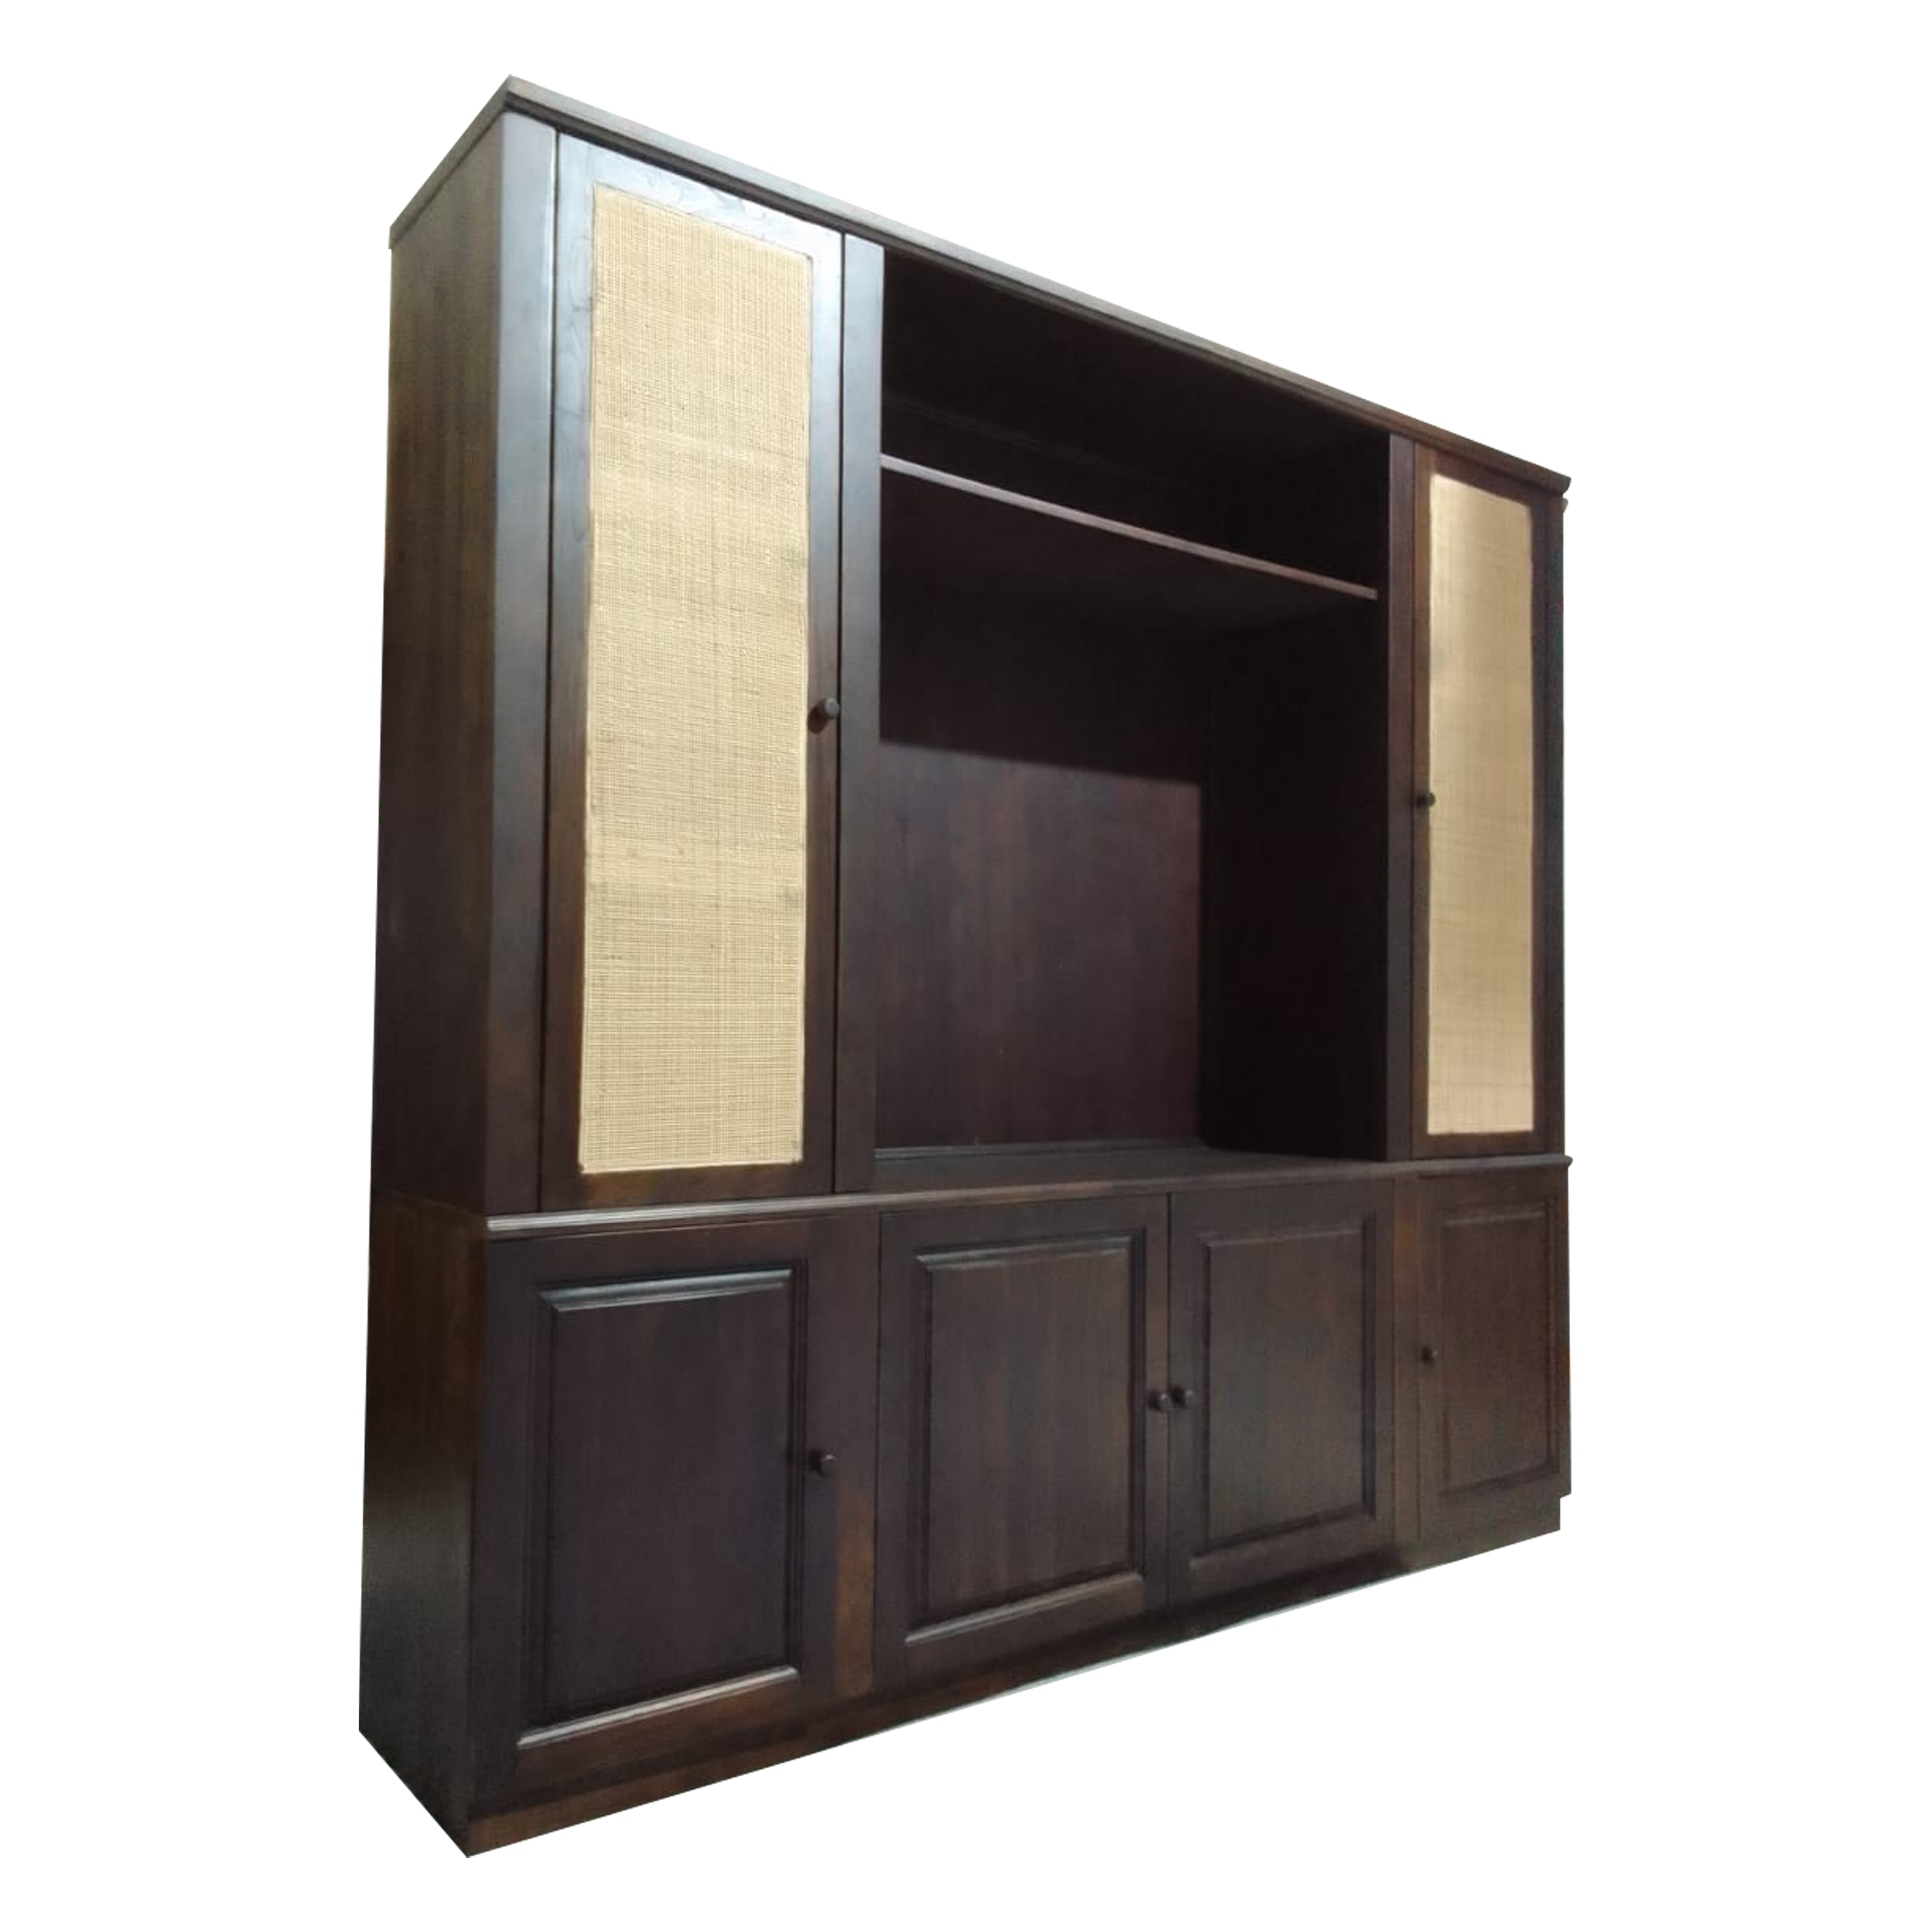 Display Rack T.V Unit in particle board in full Wall Size